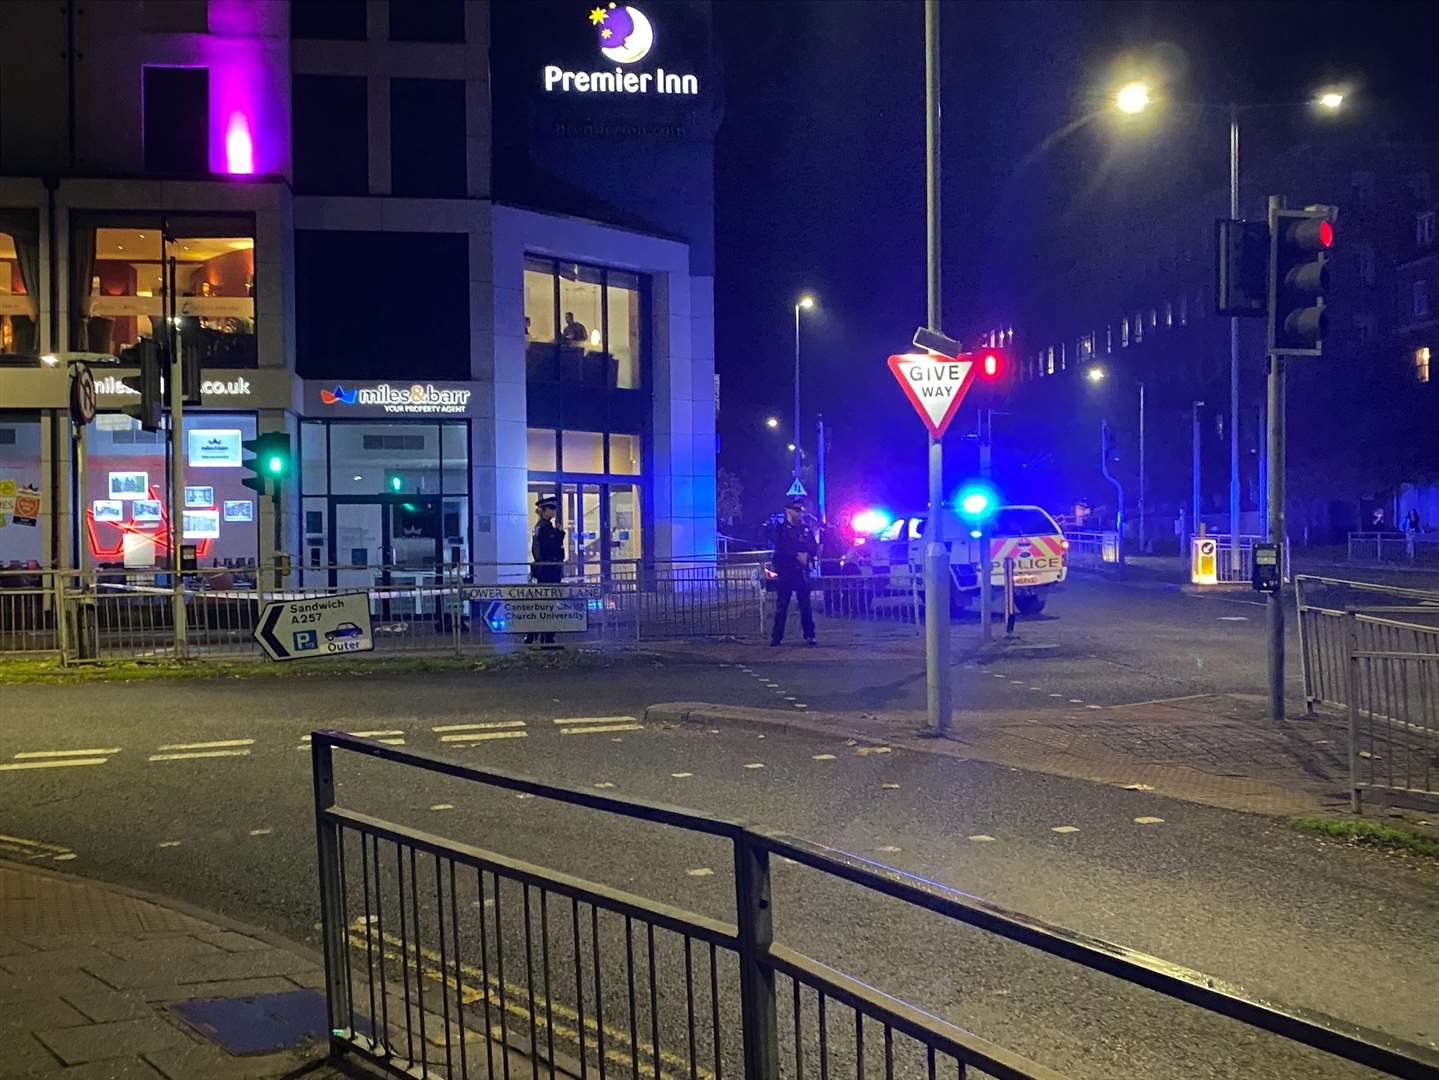 The teenager is said to have collapsed outside the Premier Inn. Picture: Oli Picton